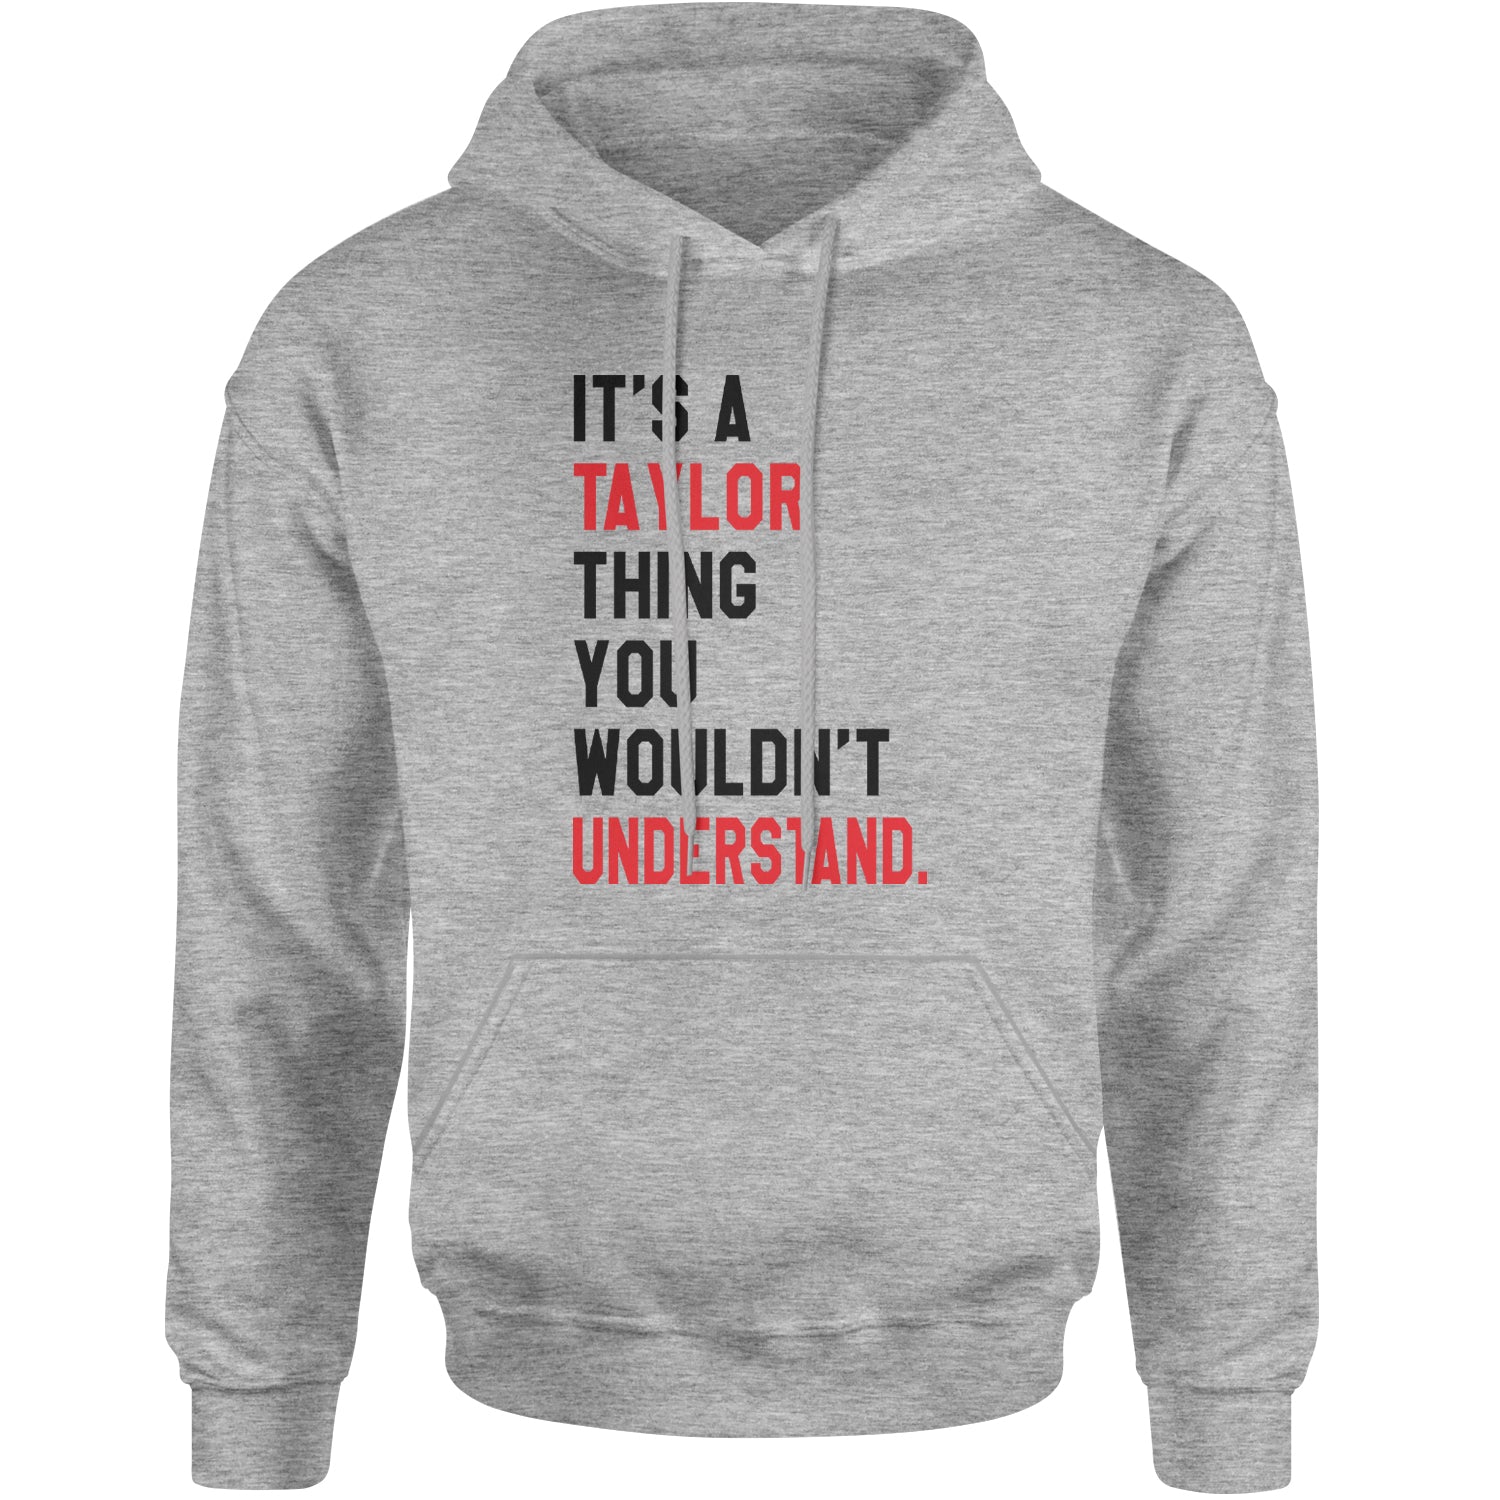 You Wouldn't Understand It's A Taylor Thing TTPD Adult Hoodie Sweatshirt